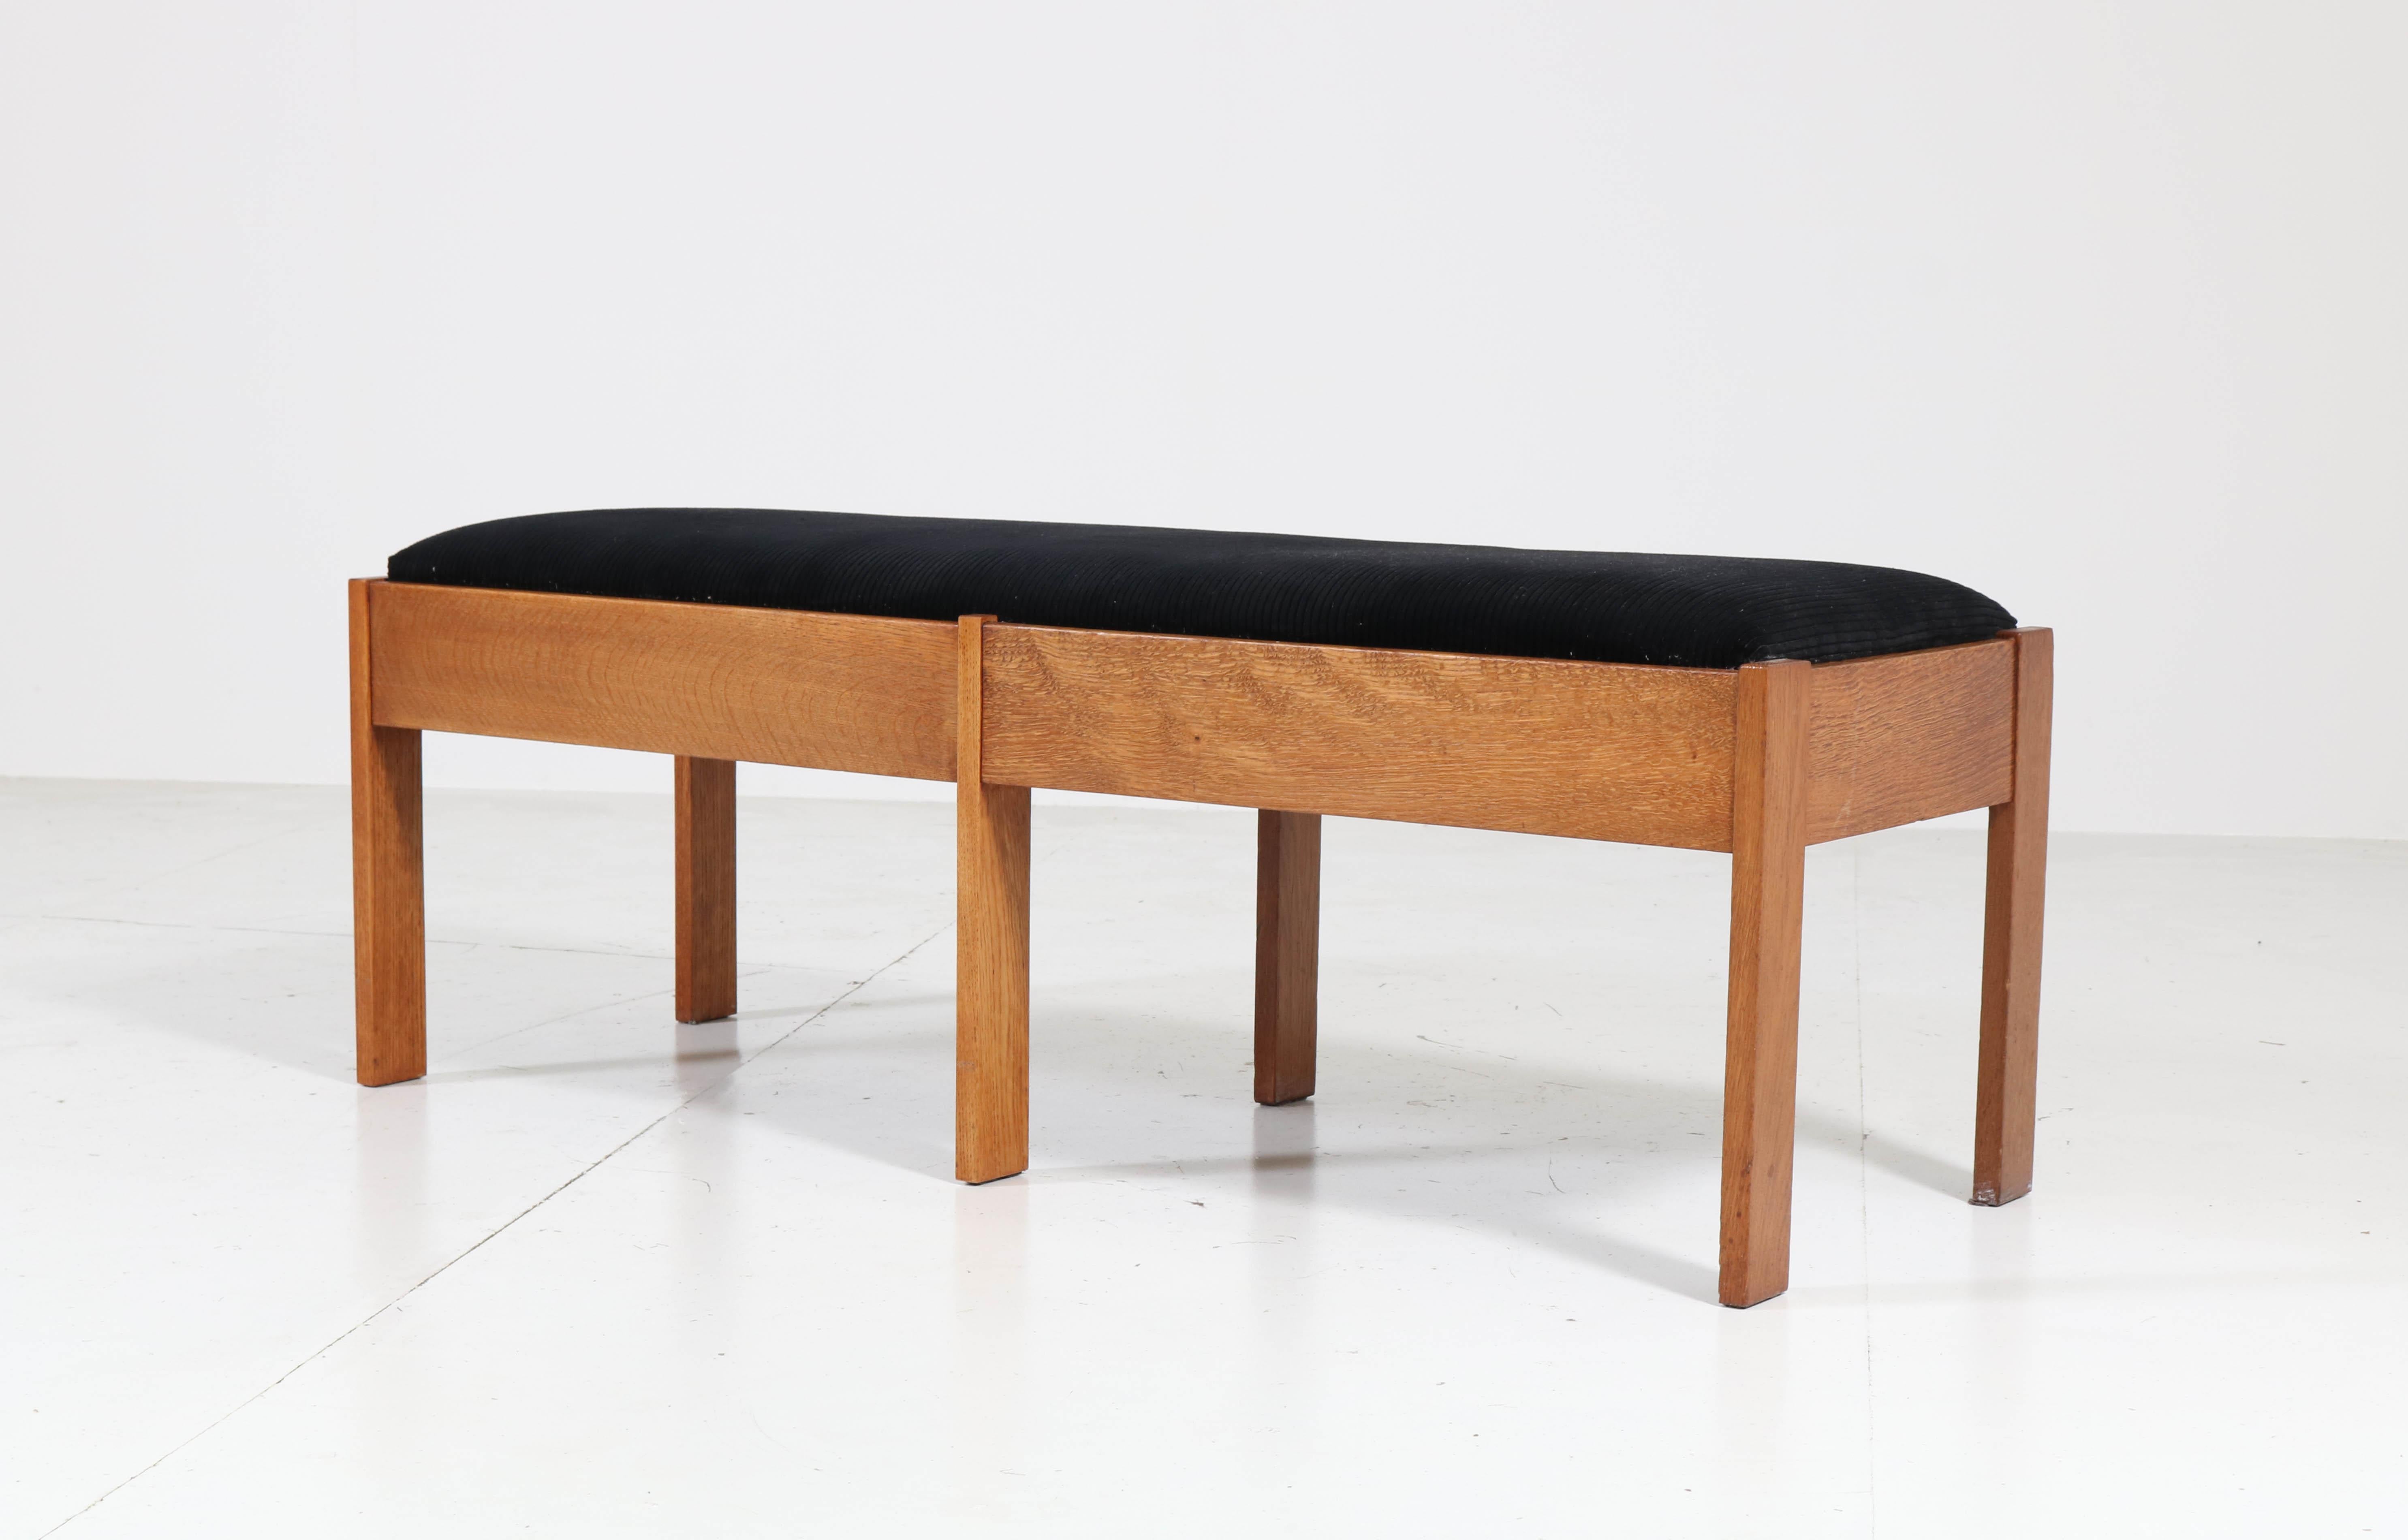 Magnificent and very rare Art Deco Haagse School bench or sofa.
Design by J.C. Jansen for L.O.V. Oosterbeek.
Striking Dutch design from the twenties.
Solid oak and re-upholstered seat with black Manchester corduroy fabric.
Marked with original